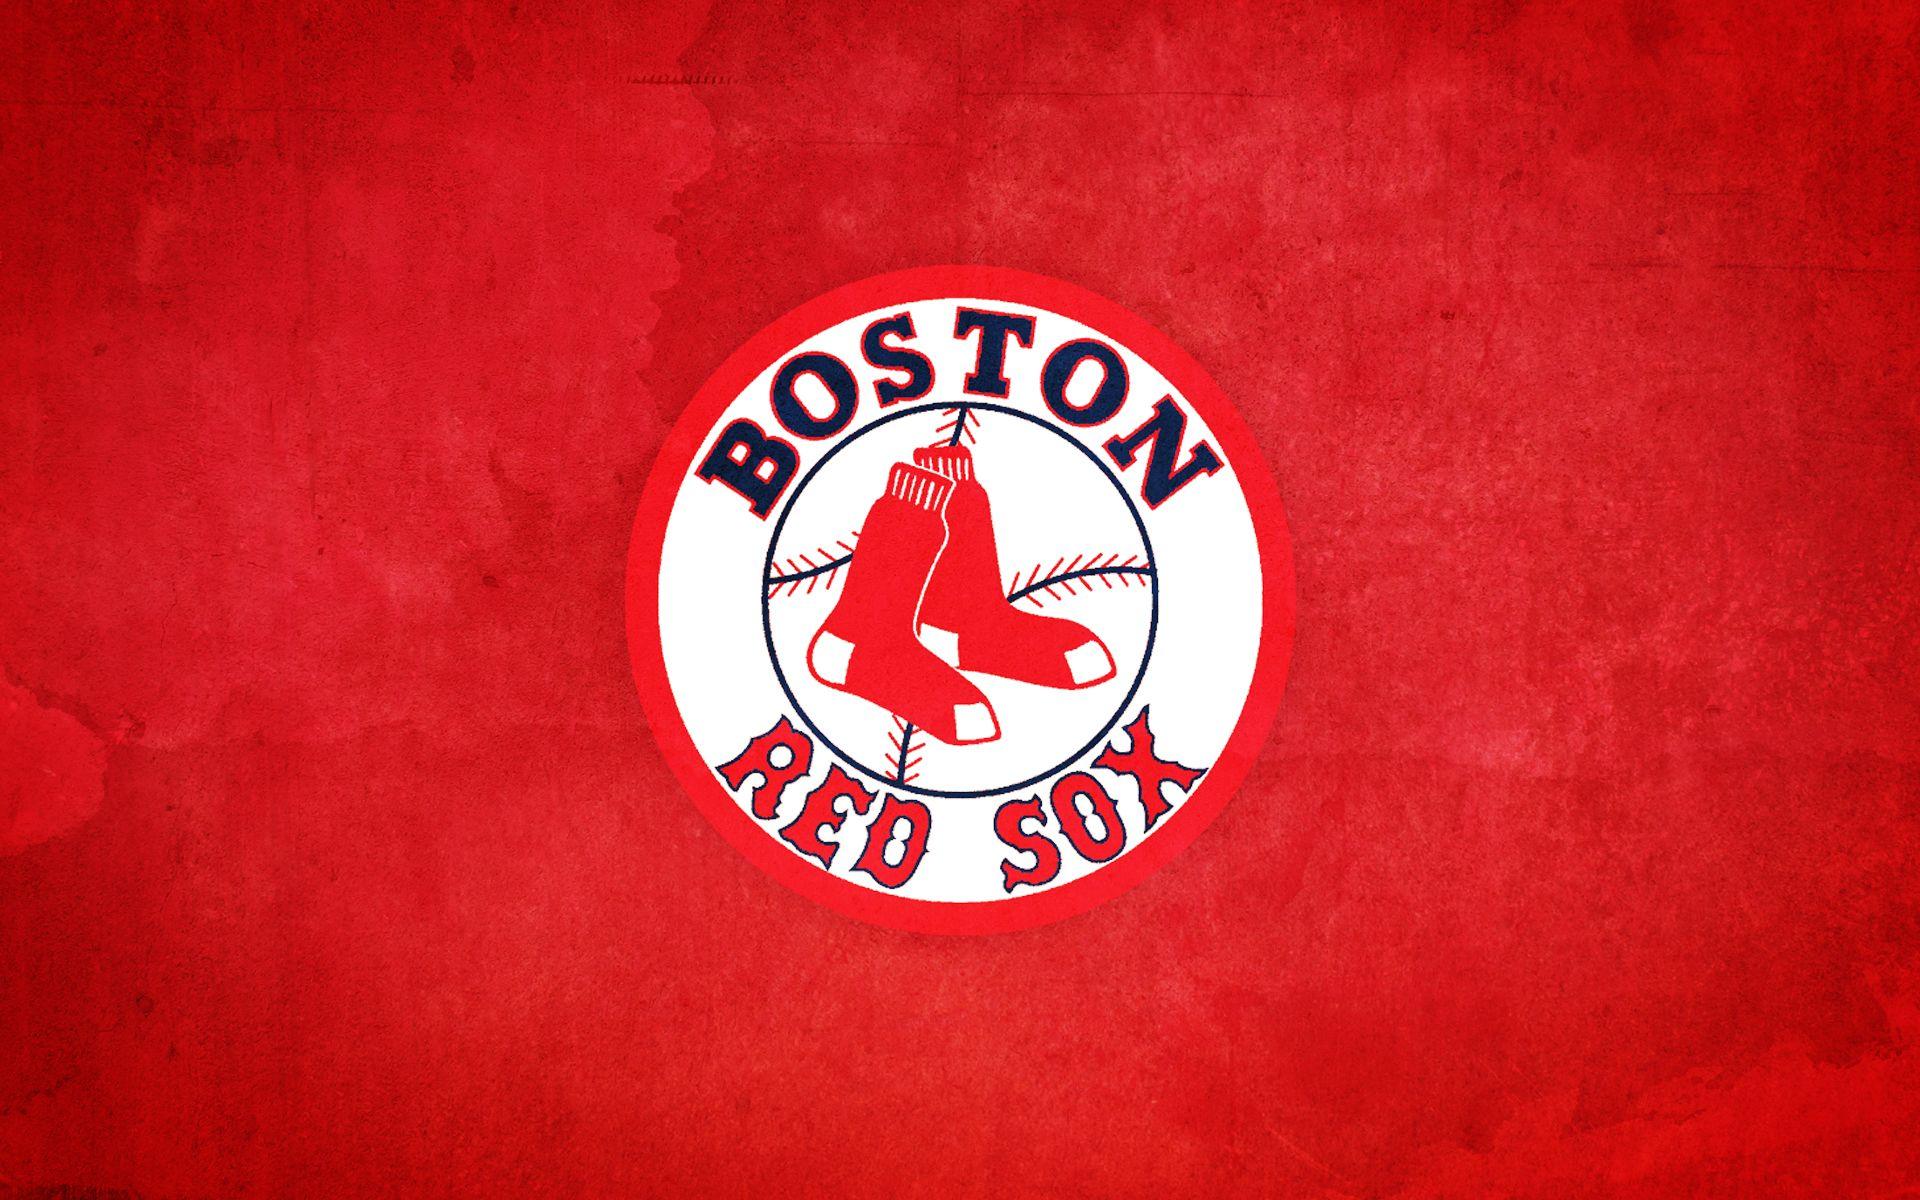 Boston Red Sox Poster Red Sox Artwork Boston Gift Red Sox Layered Man  Cave ArtBoston Map  Boston red sox poster Boston red sox wallpaper Boston  red sox gifts